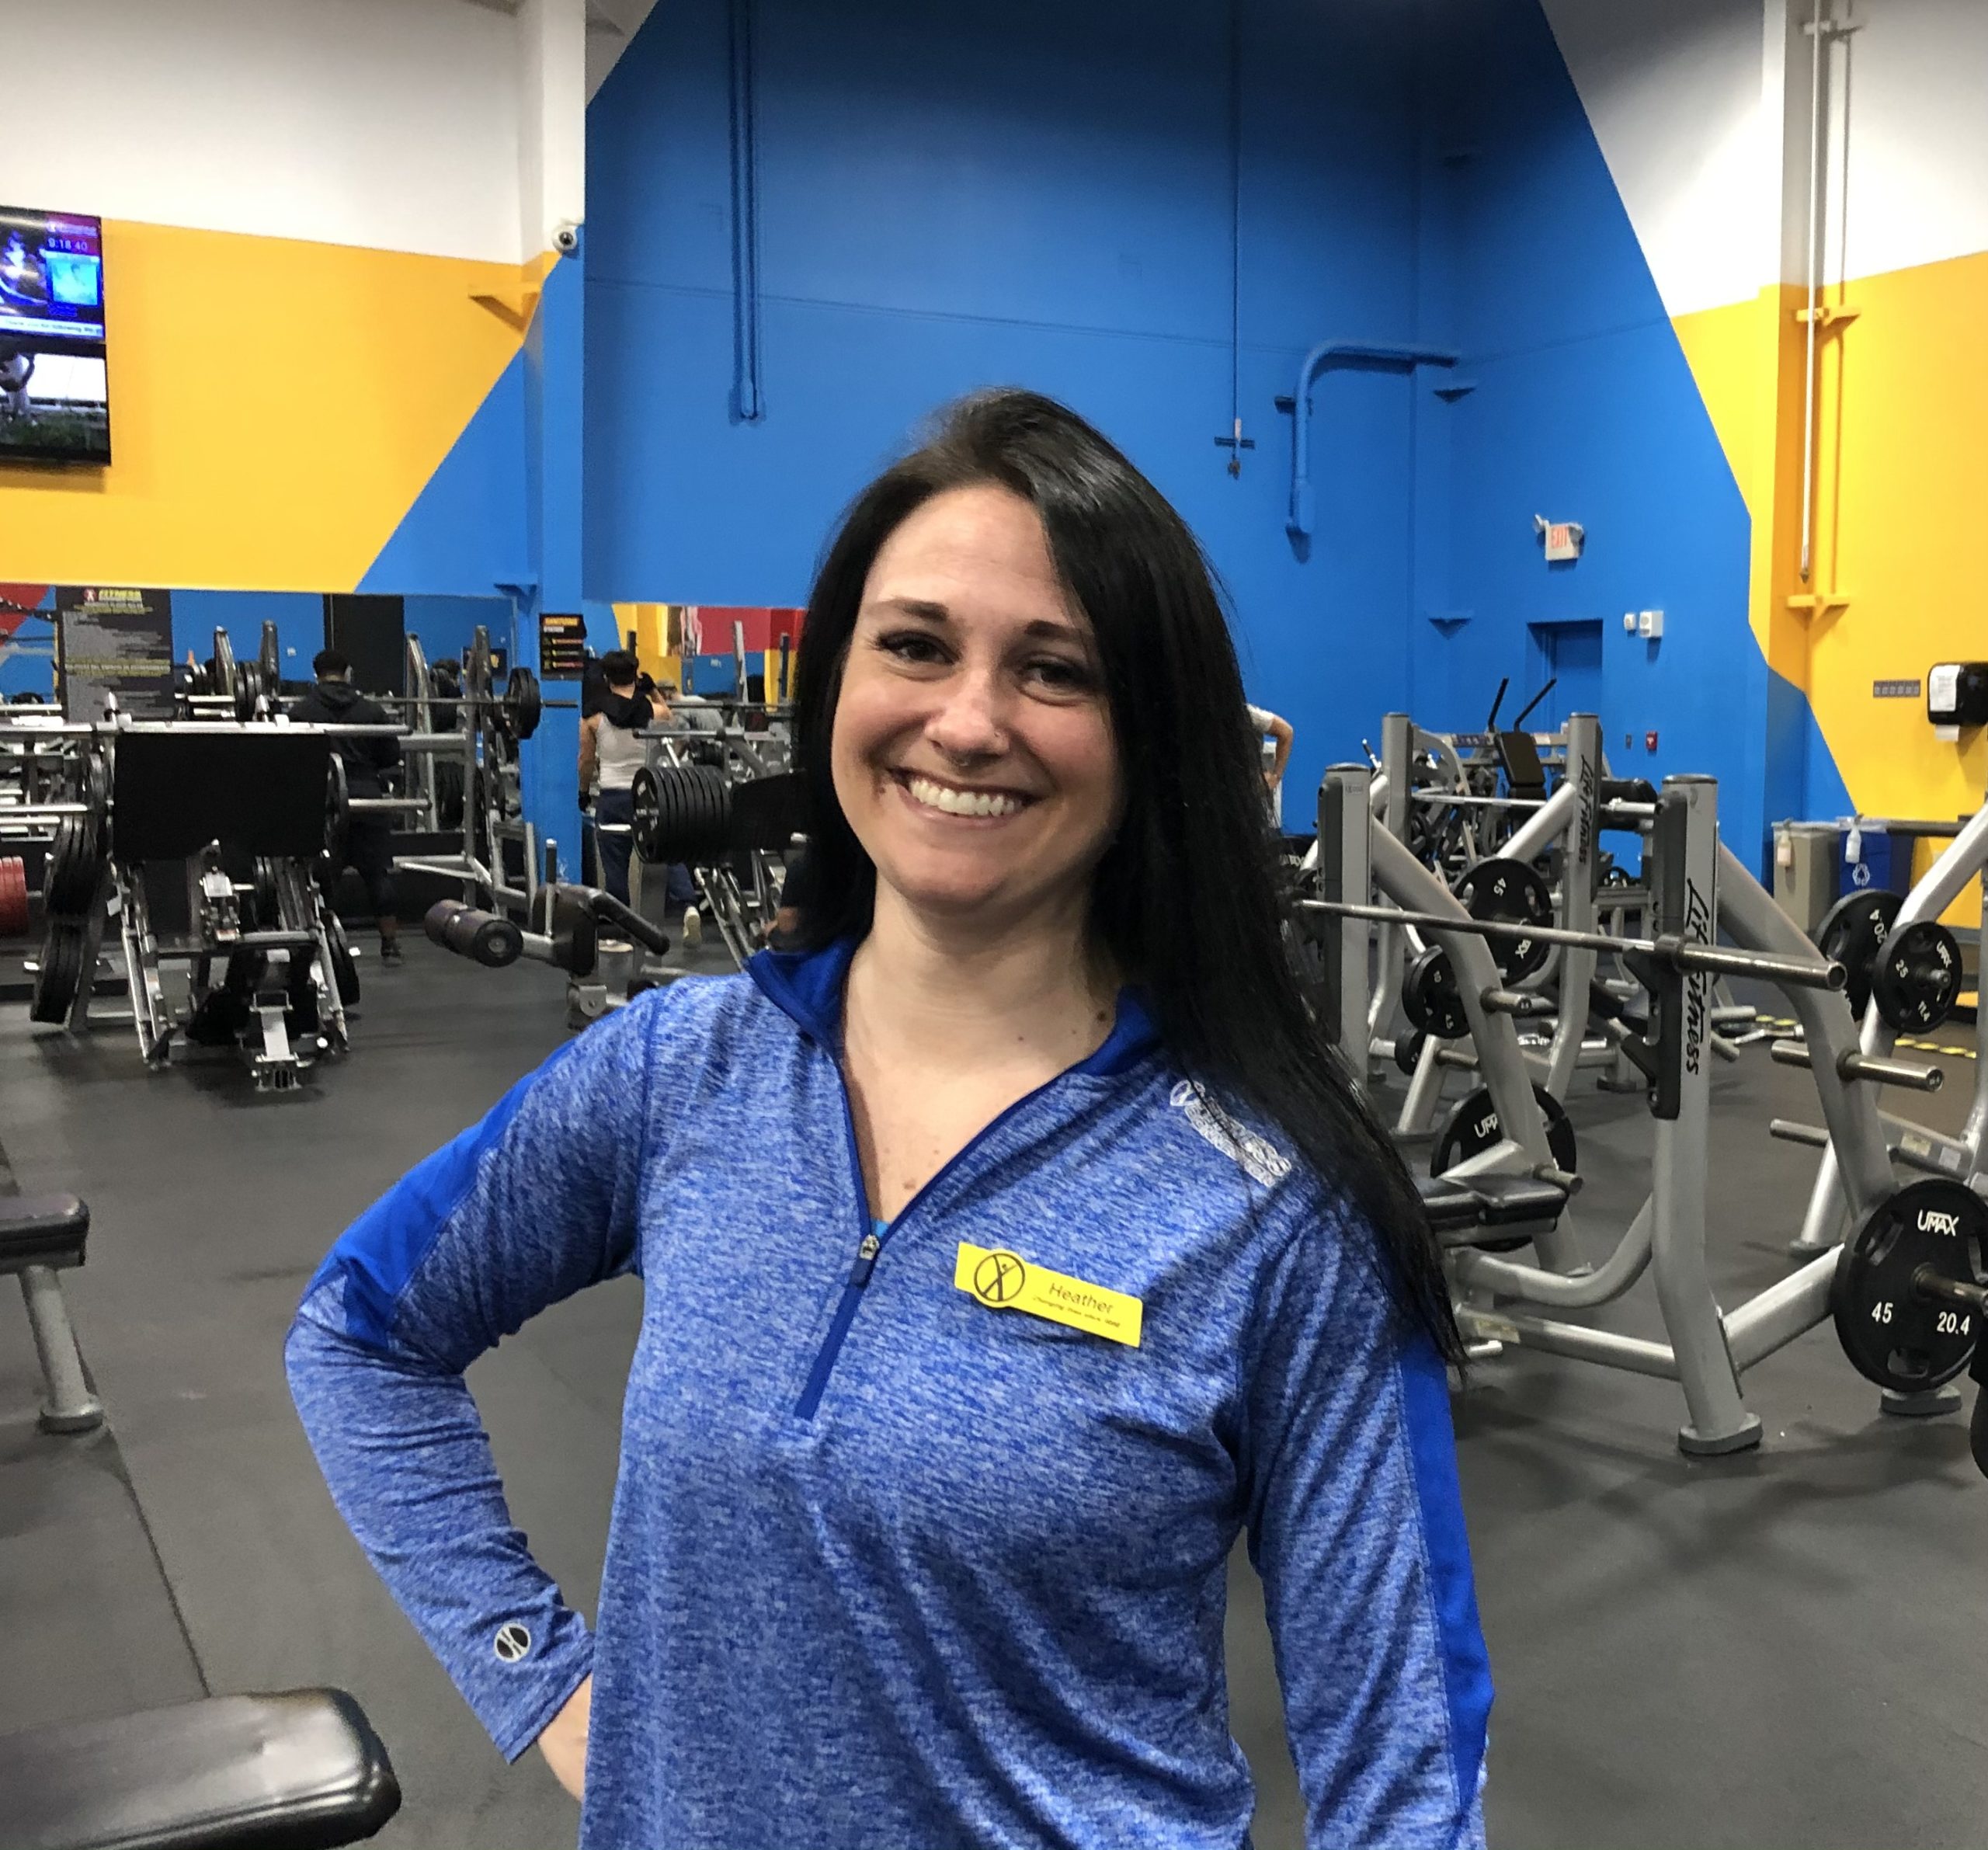 Heather Hyde Club Manager at Fitness Connection